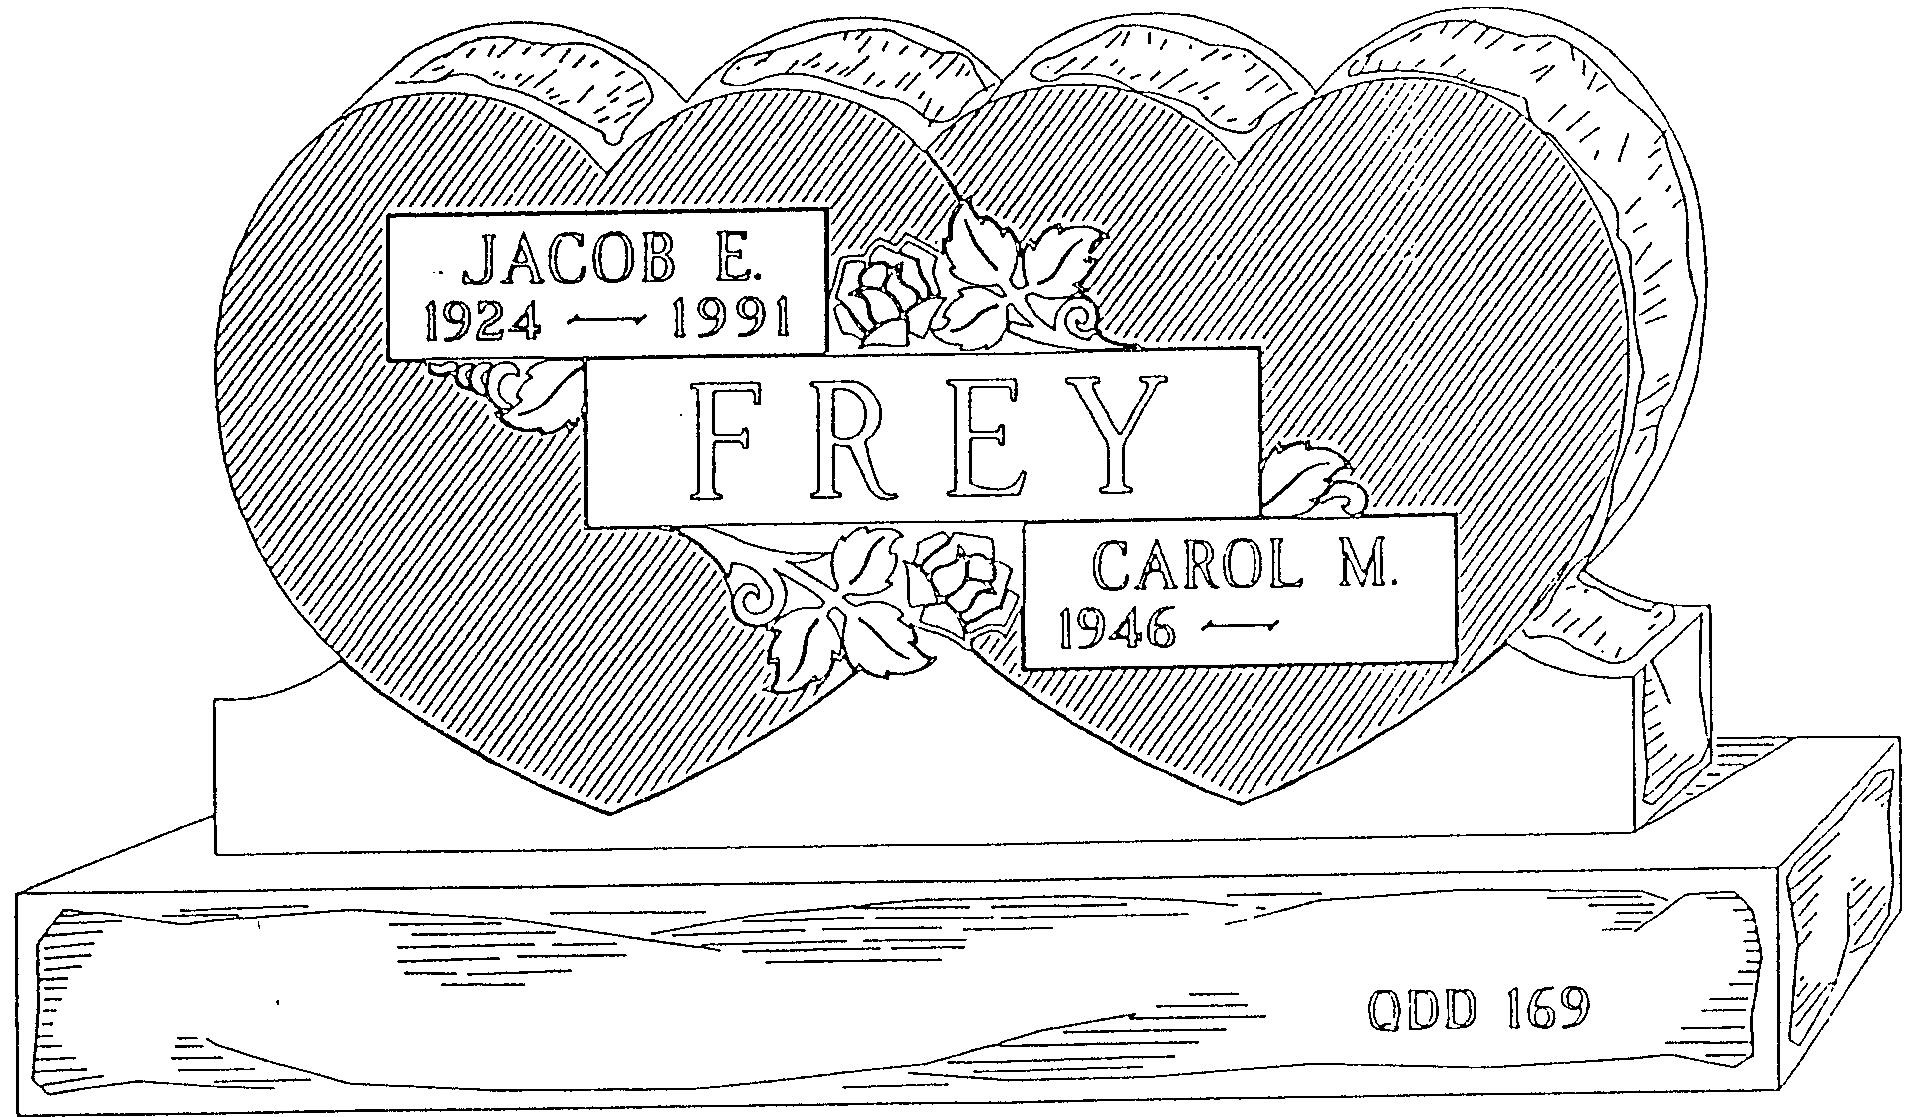 a black and white drawing of a gravestone for jacob e. frey